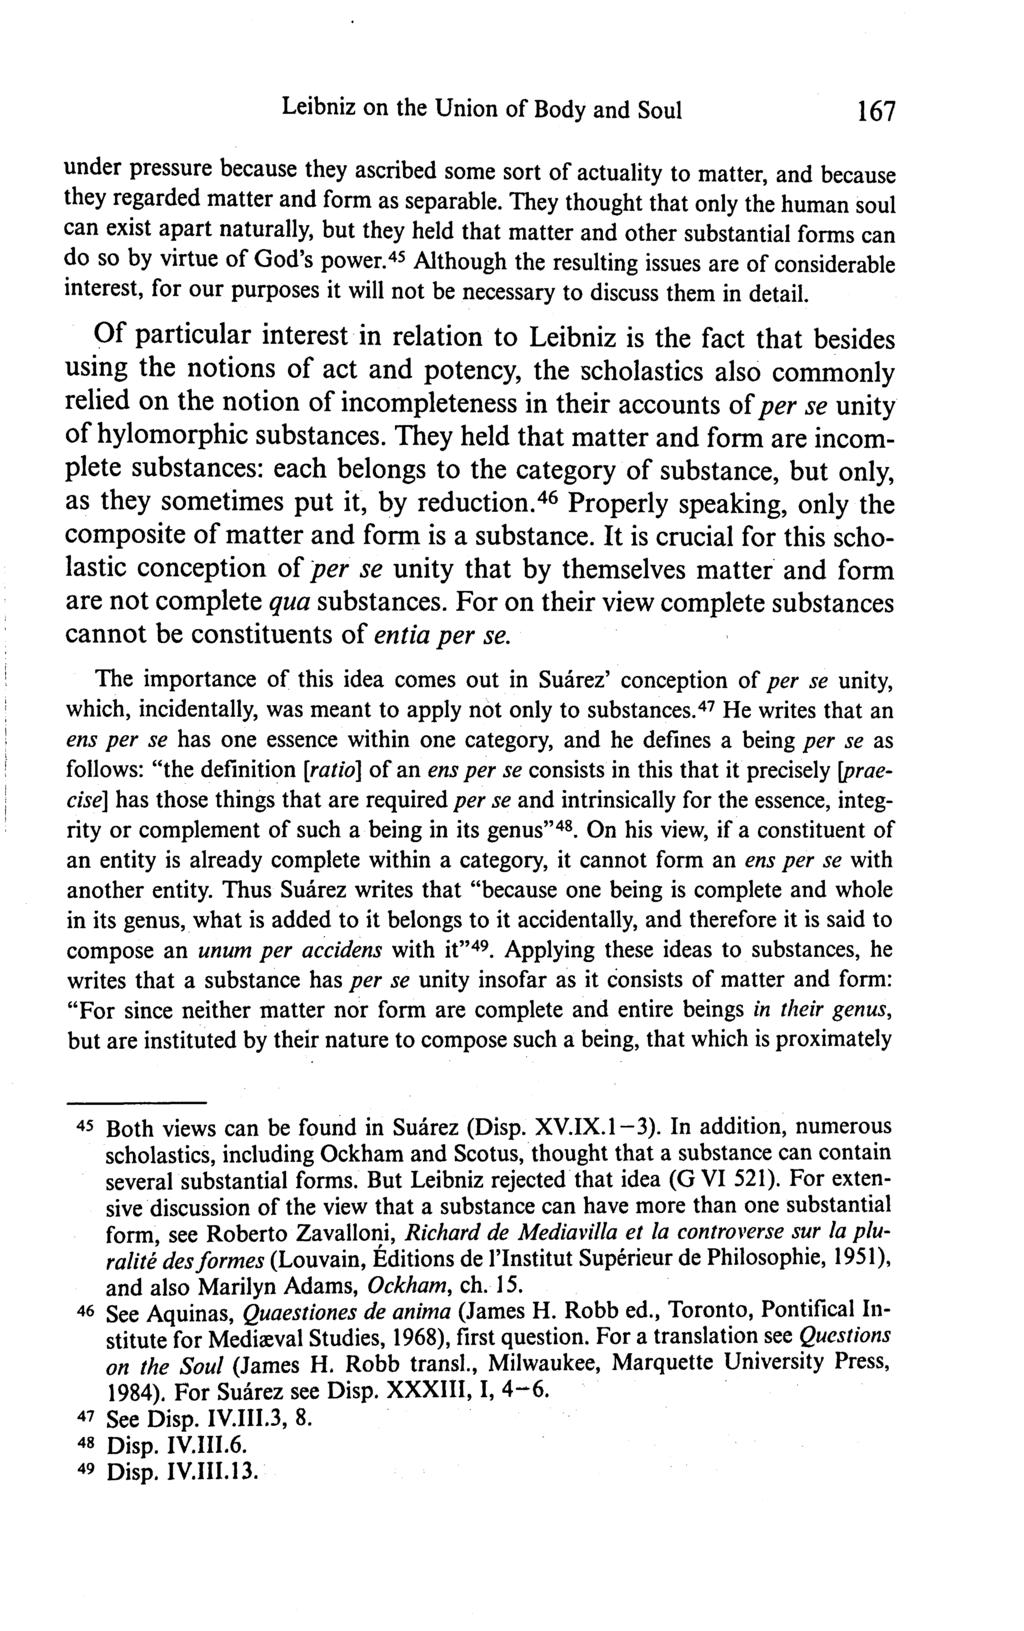 Leibniz on the Union of Body and Soul 167 under pressure because they ascribed some sort of actuality to matter, and because they regarded matter and form as separable.